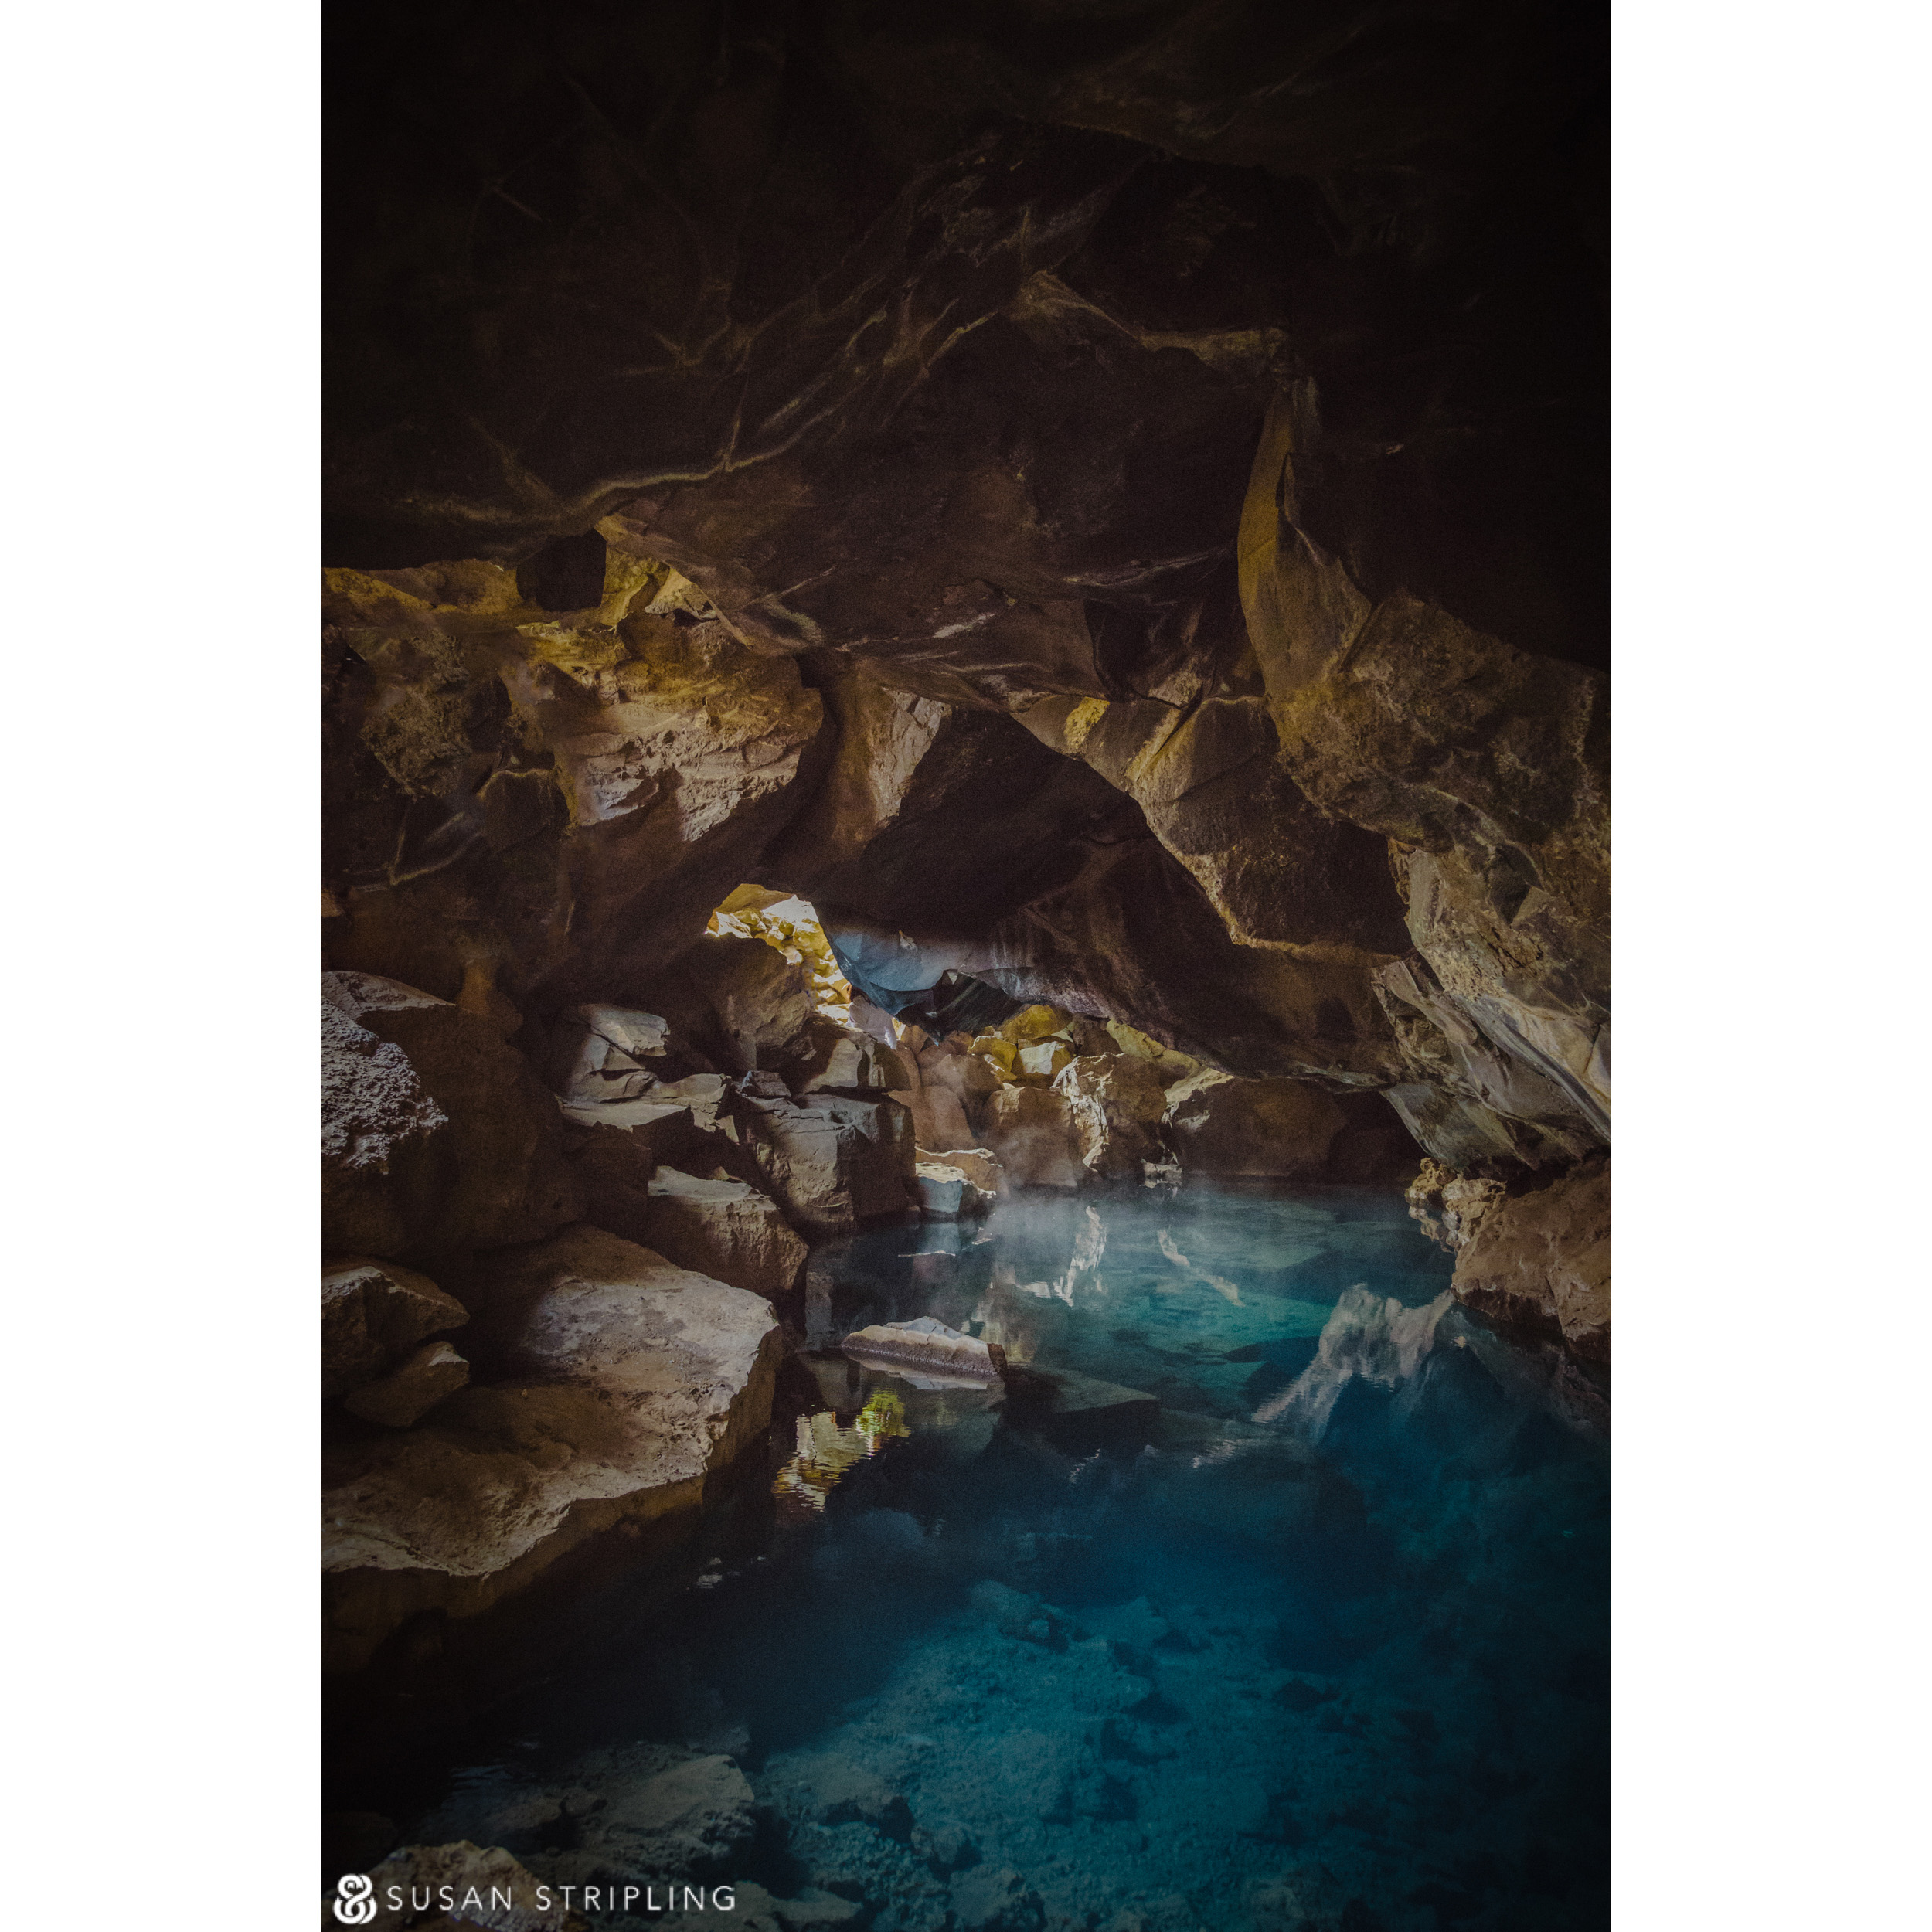 A blue pool in a cave with rocks around it, reminiscent of Game of Thrones Location Photos.